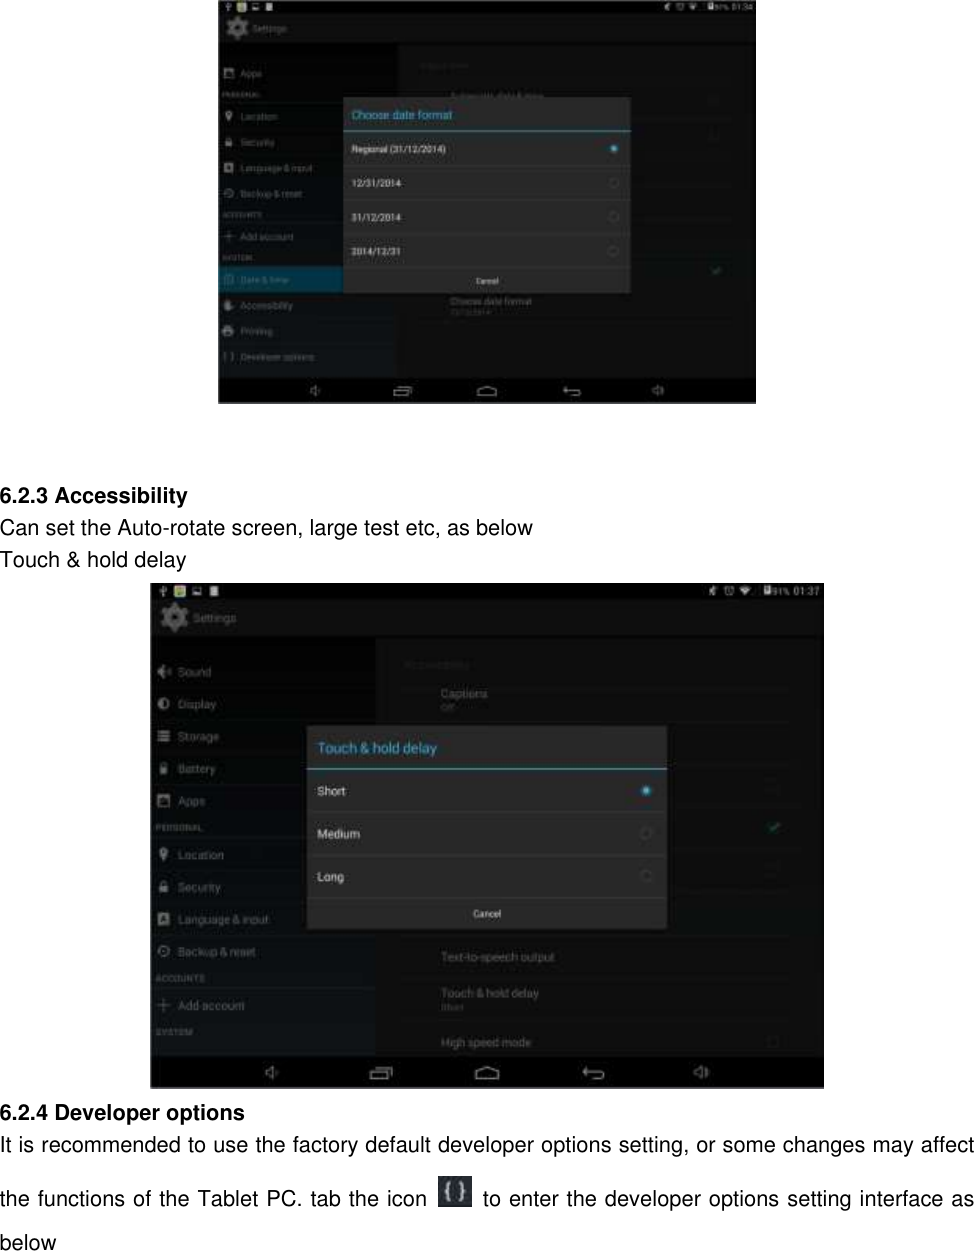    6.2.3 Accessibility Can set the Auto-rotate screen, large test etc, as below Touch &amp; hold delay  6.2.4 Developer options It is recommended to use the factory default developer options setting, or some changes may affect the functions of the Tablet PC. tab the icon    to enter the developer options setting interface as below  